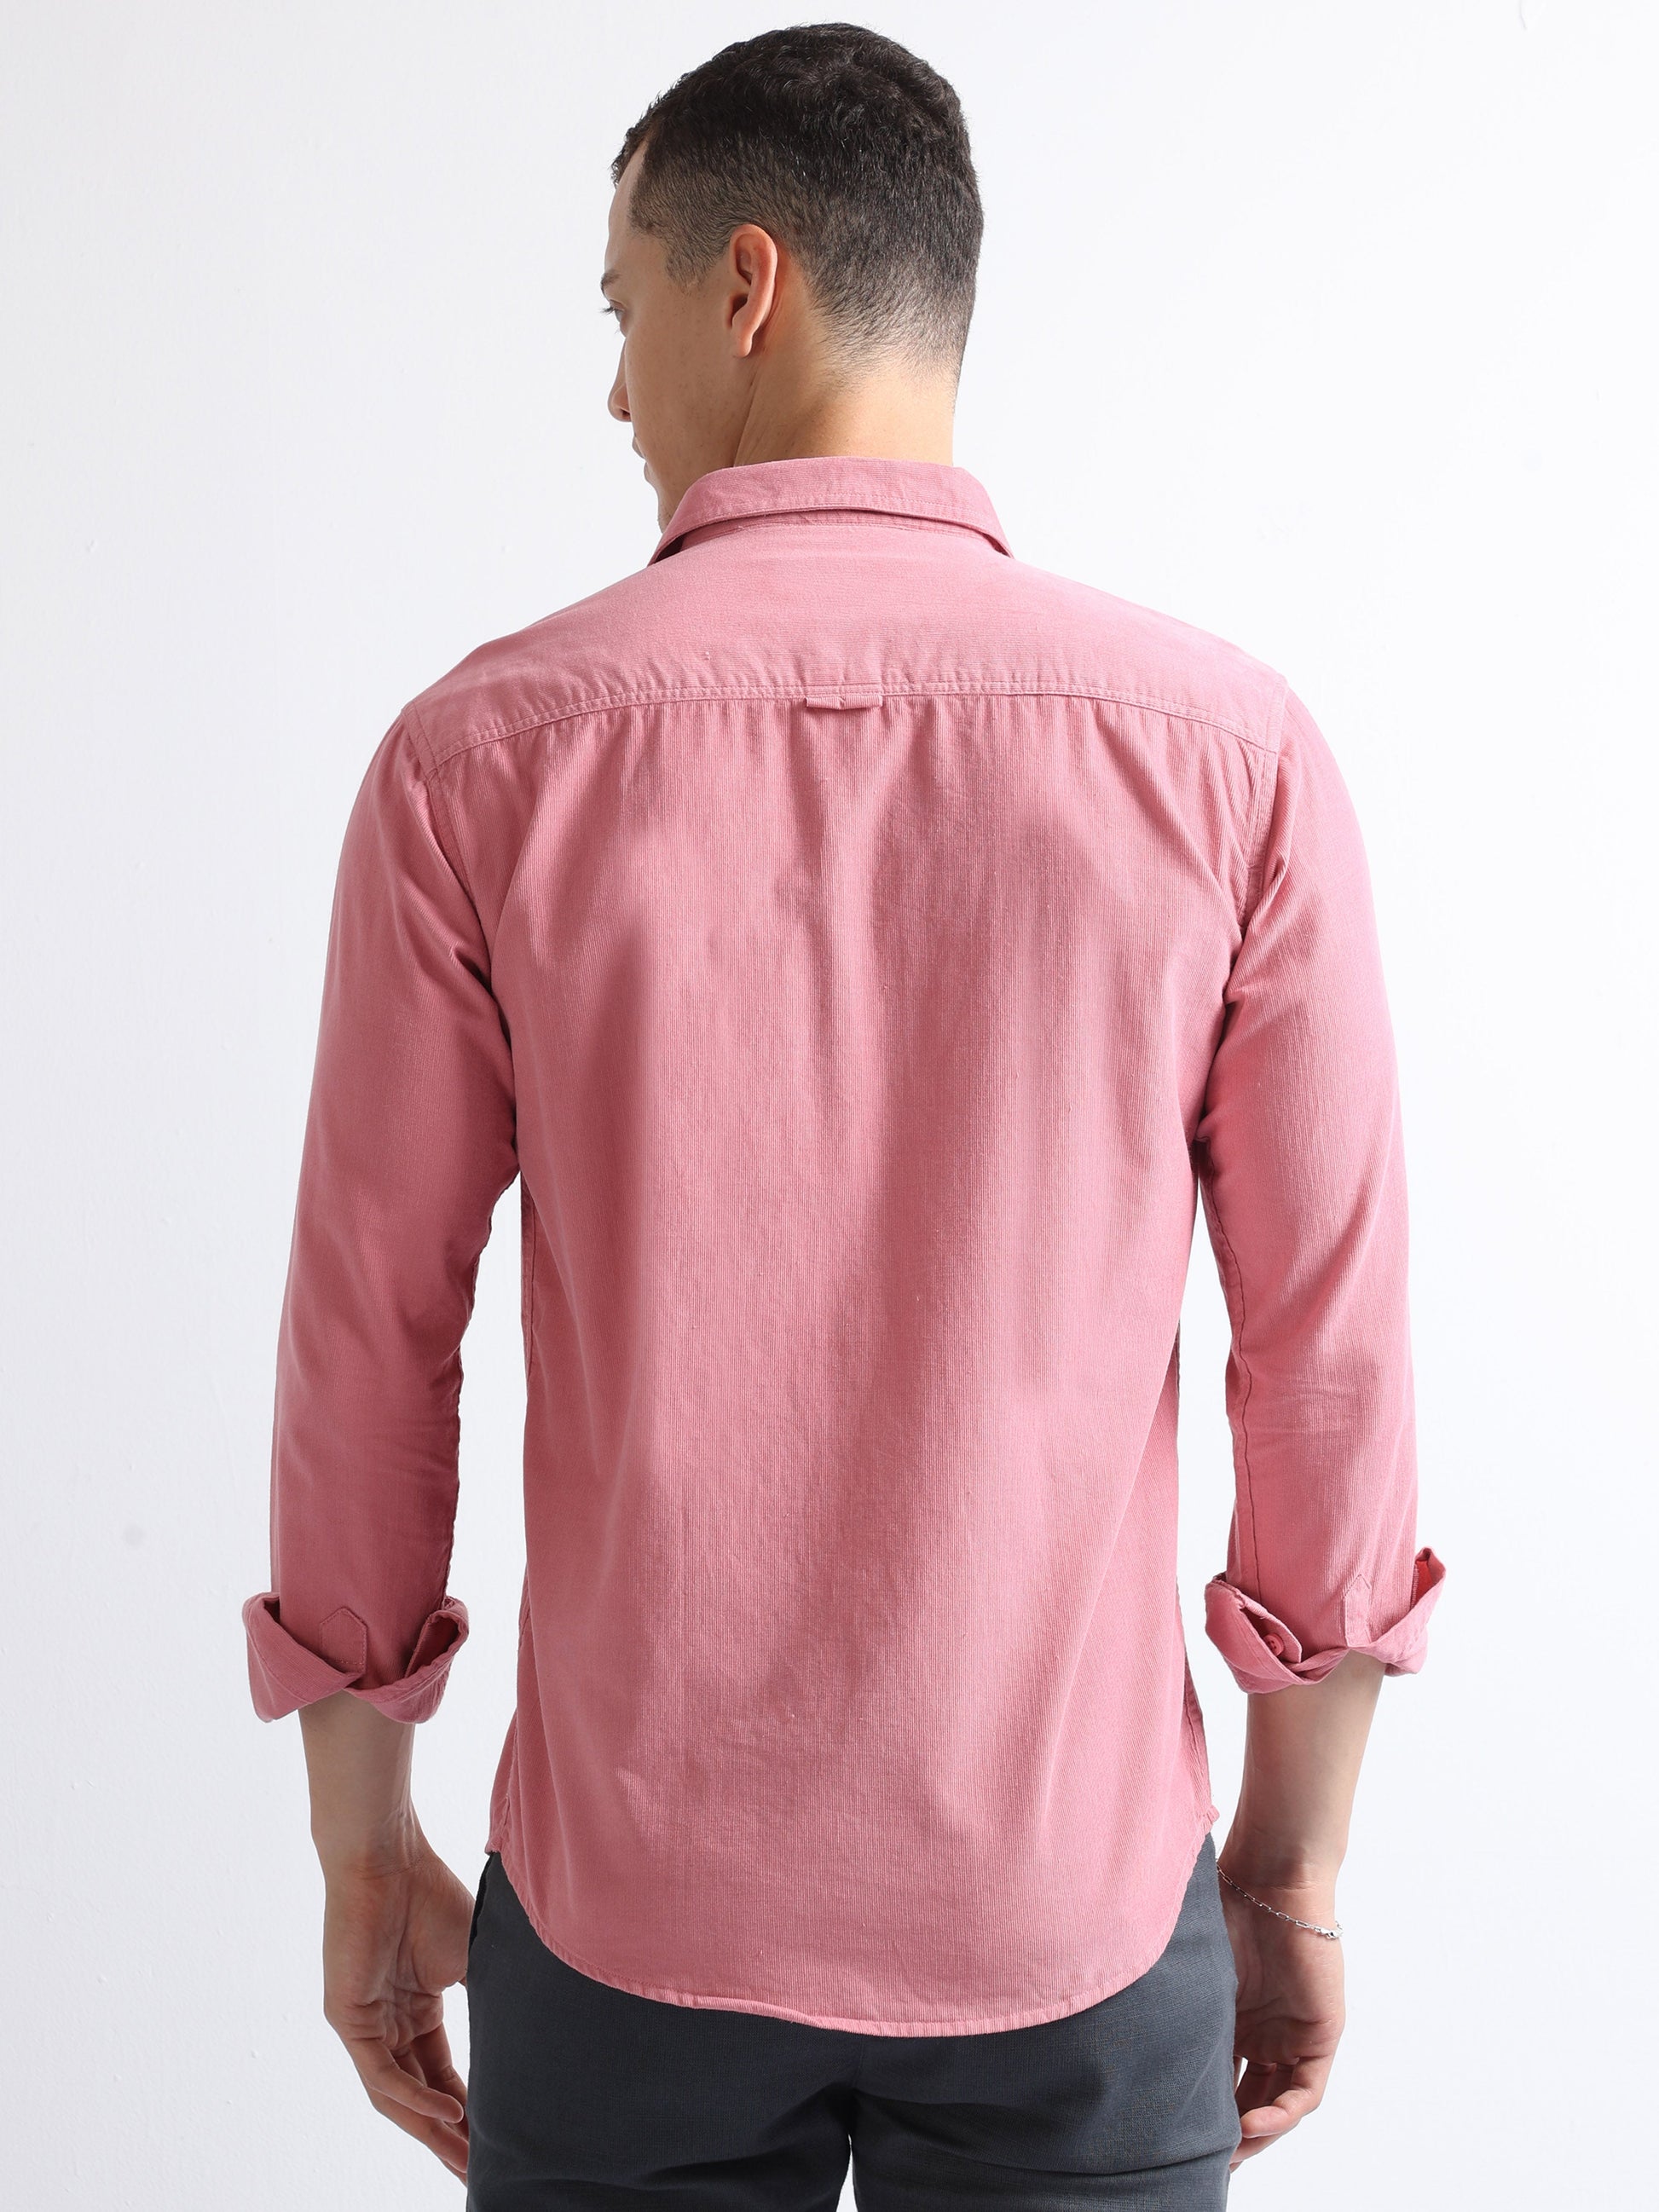 Buy Snap Button Double Pocket Shirt For Mens Online.